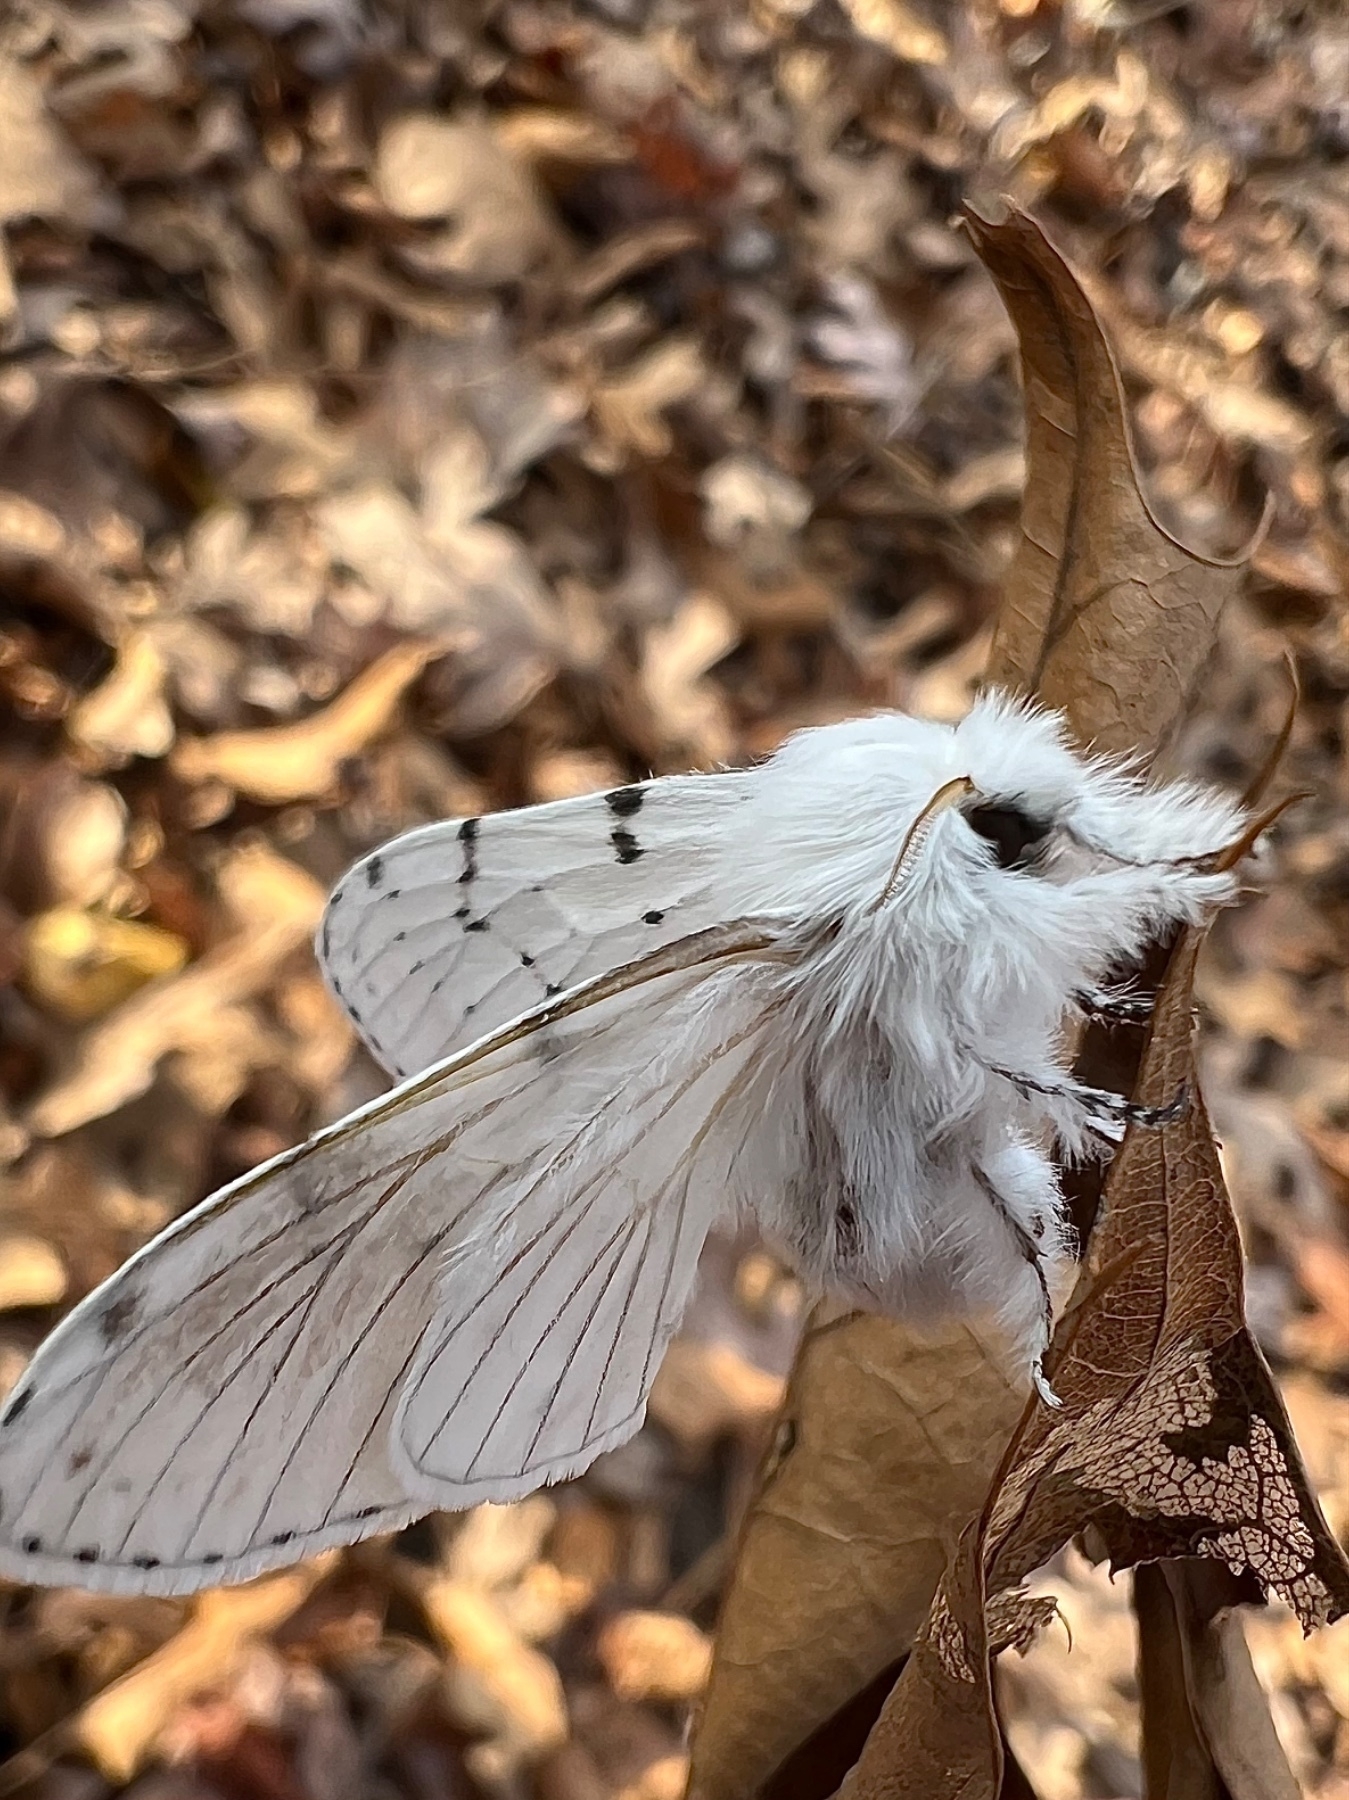 a furry white moth is perched on a brown leaf set against a blurred forest background. The image is taken from the side.